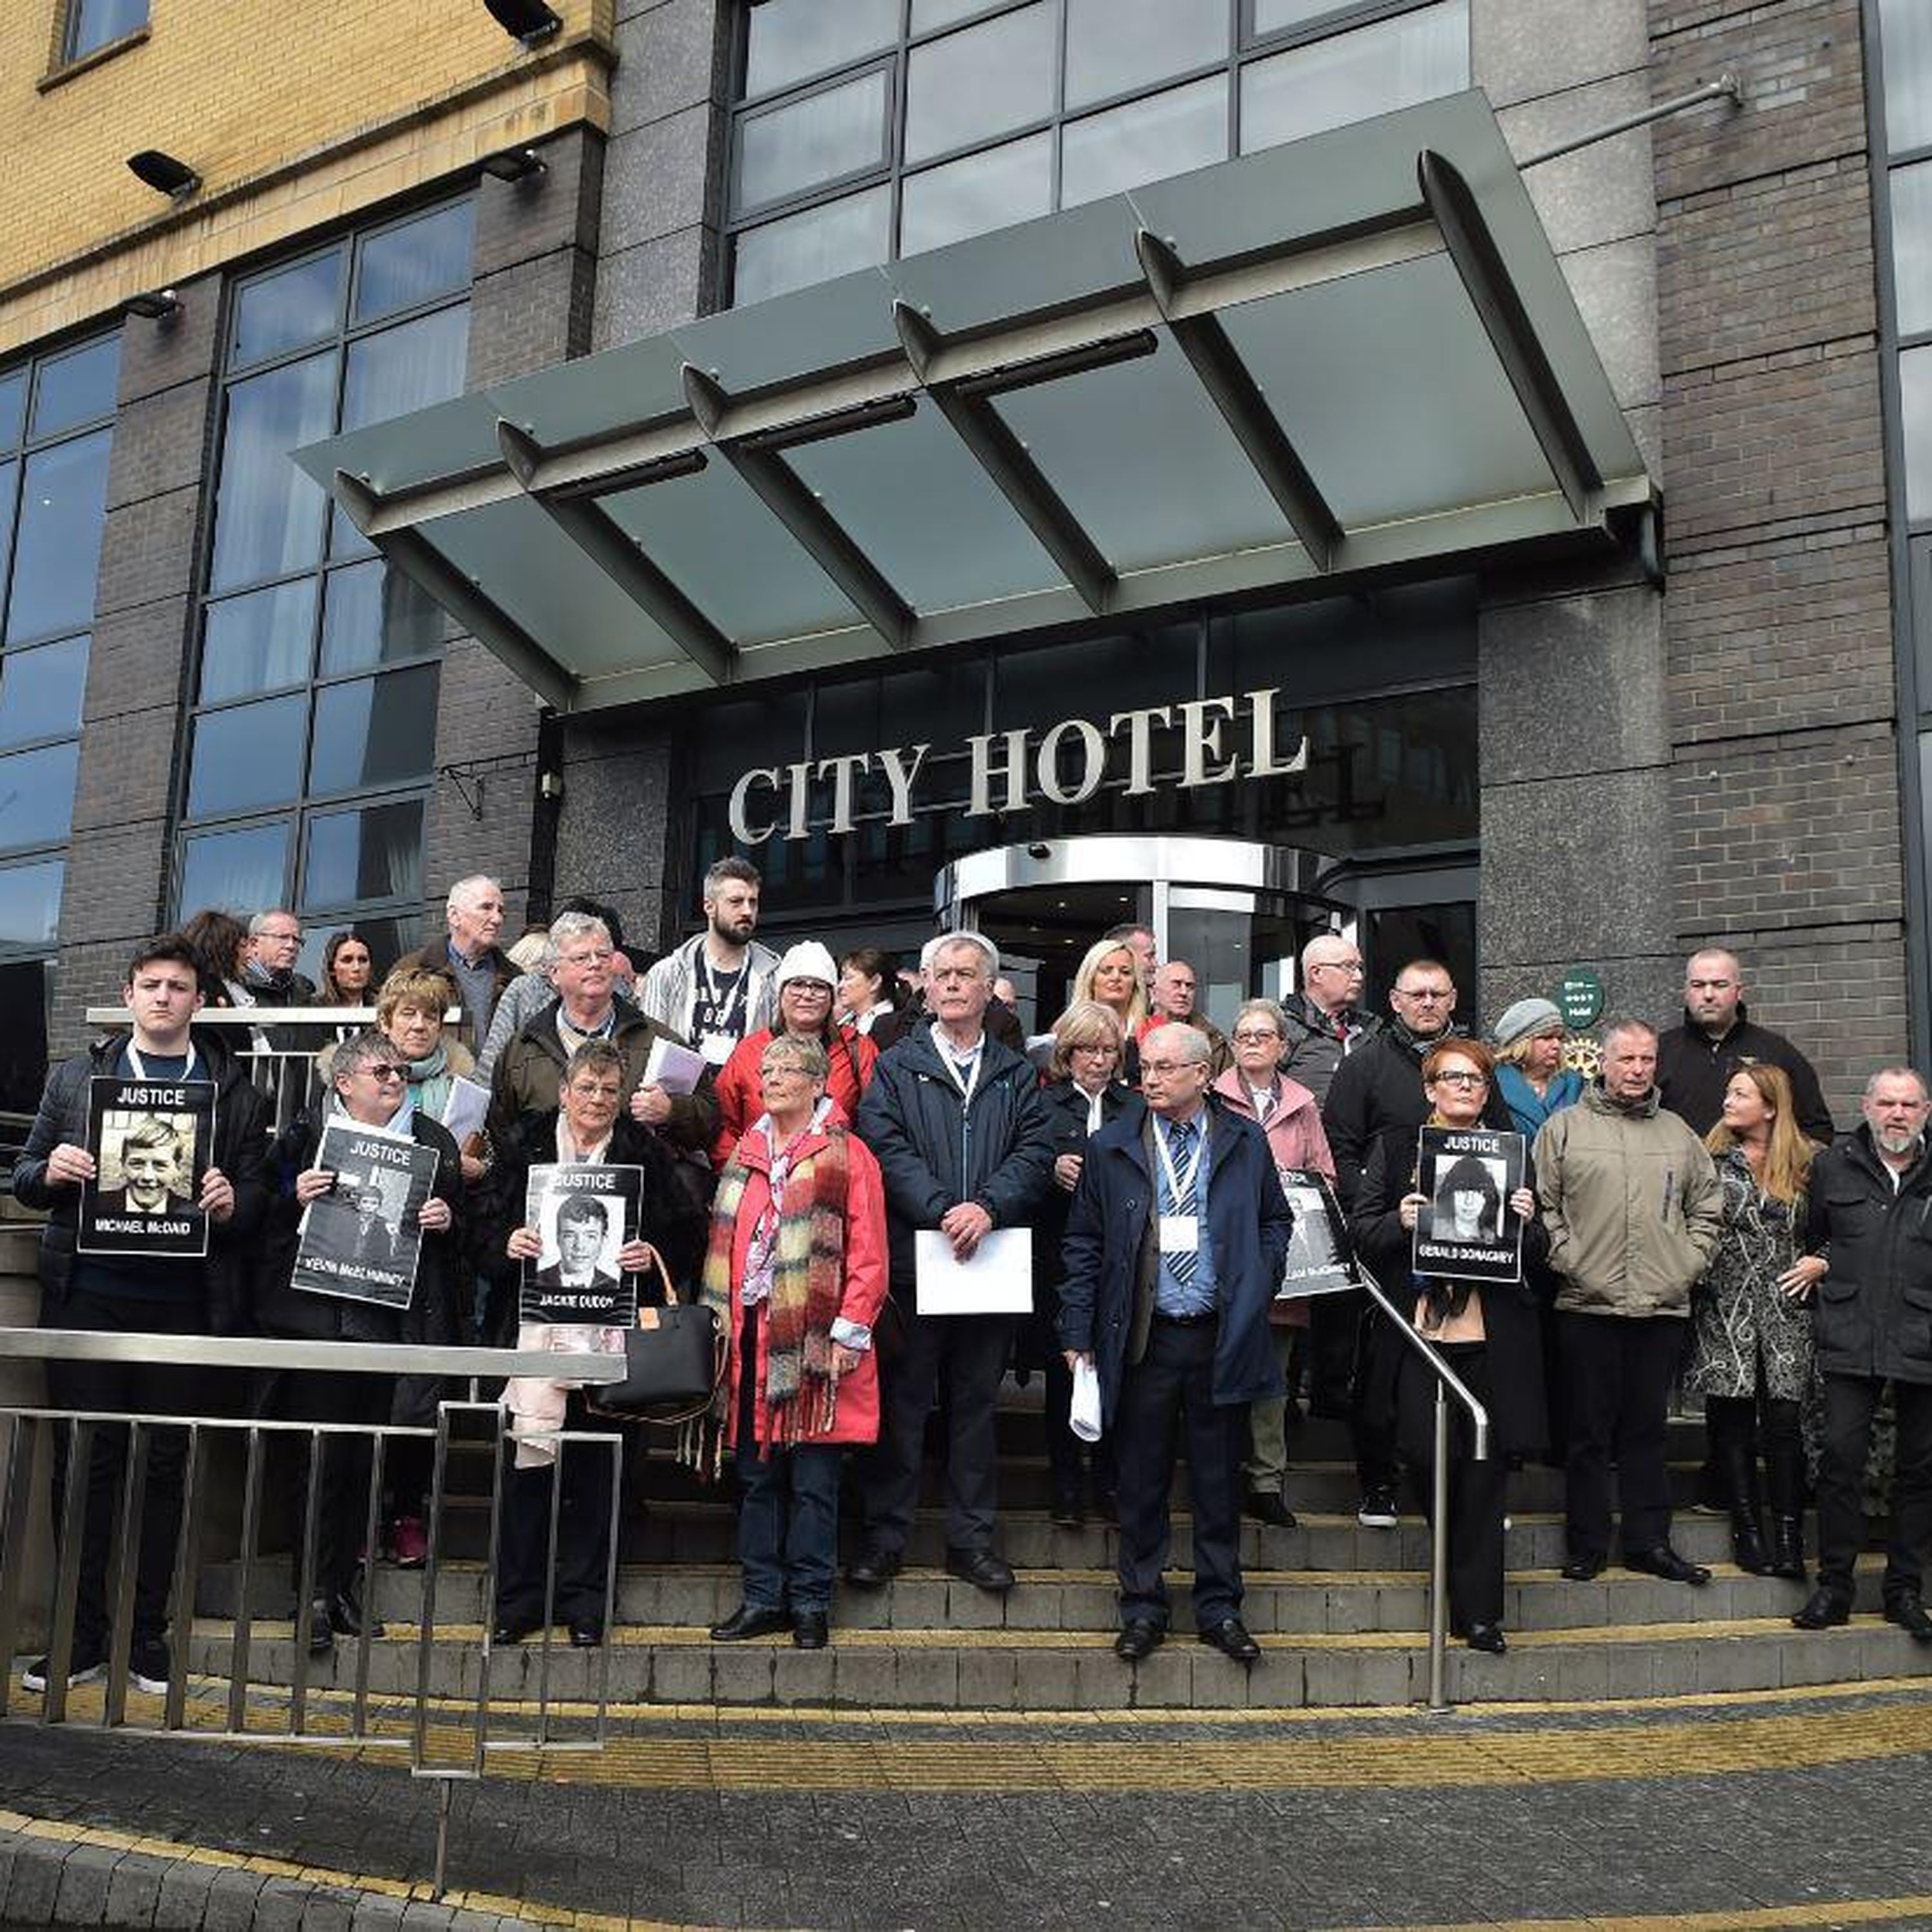 cover art for 4076: LISTEN ¦ "Bloody Sunday had a very deep affect on Derry... (it was) experienced by Derry as a communal wound"  Journalist and activist Eamonn McCann spoke to Frank ahead of the PPS announcement this morning